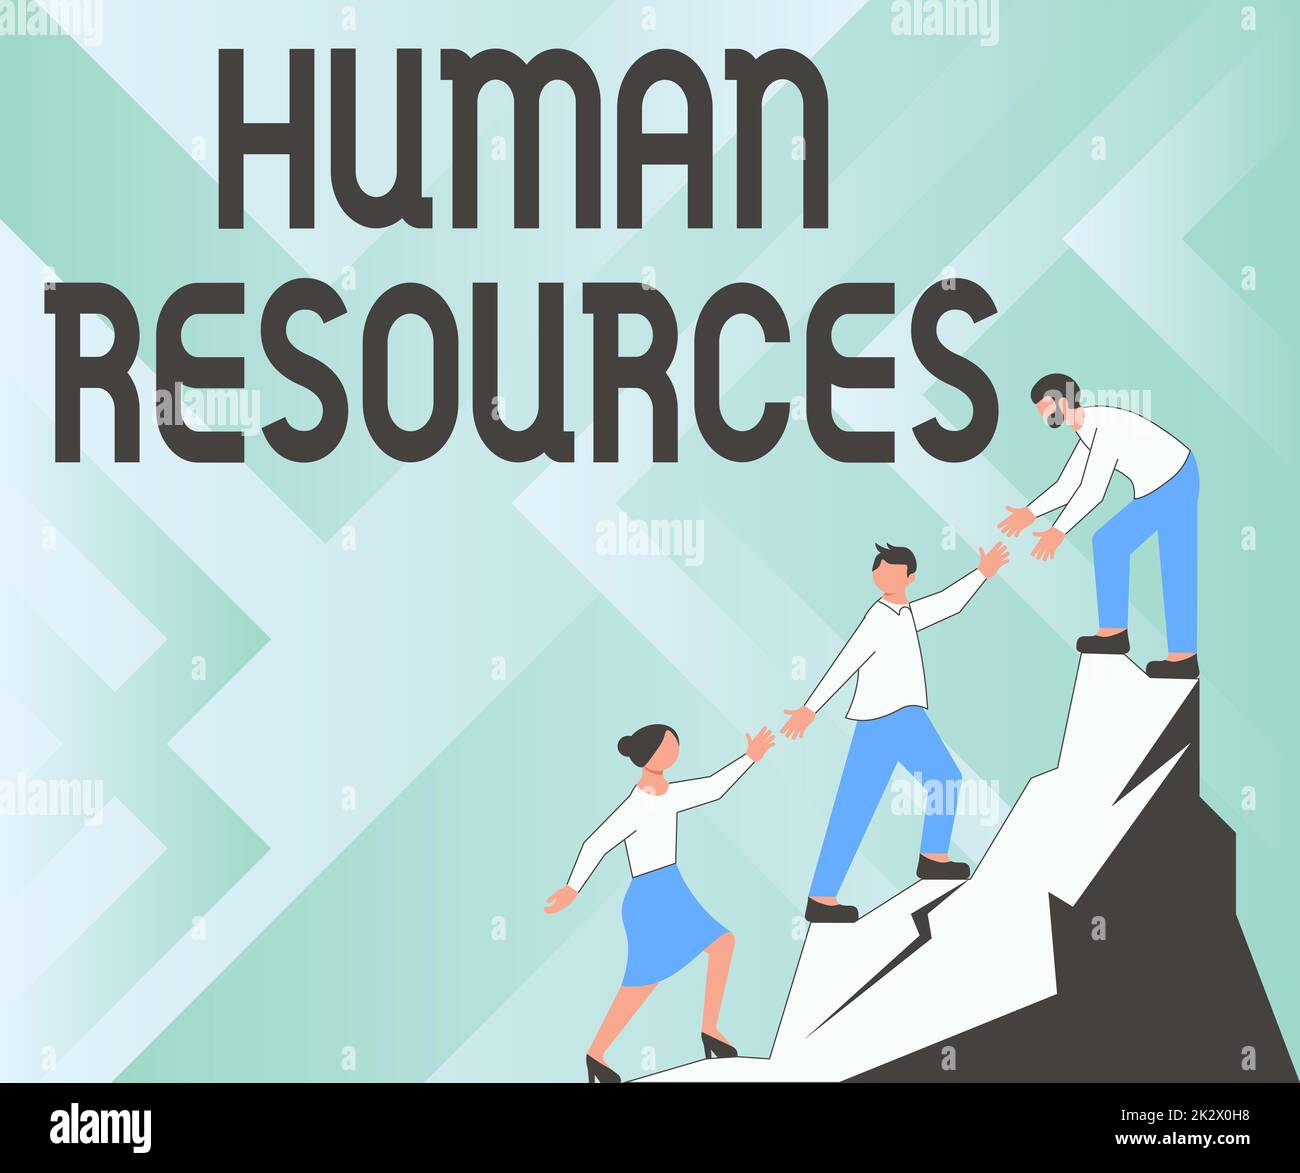 Text caption presenting Human Resources. Word Written on The showing who make up the workforce of an organization Colleagues Climbing Upwards Mountain Reaching Success Presenting Teamwork. Stock Photo